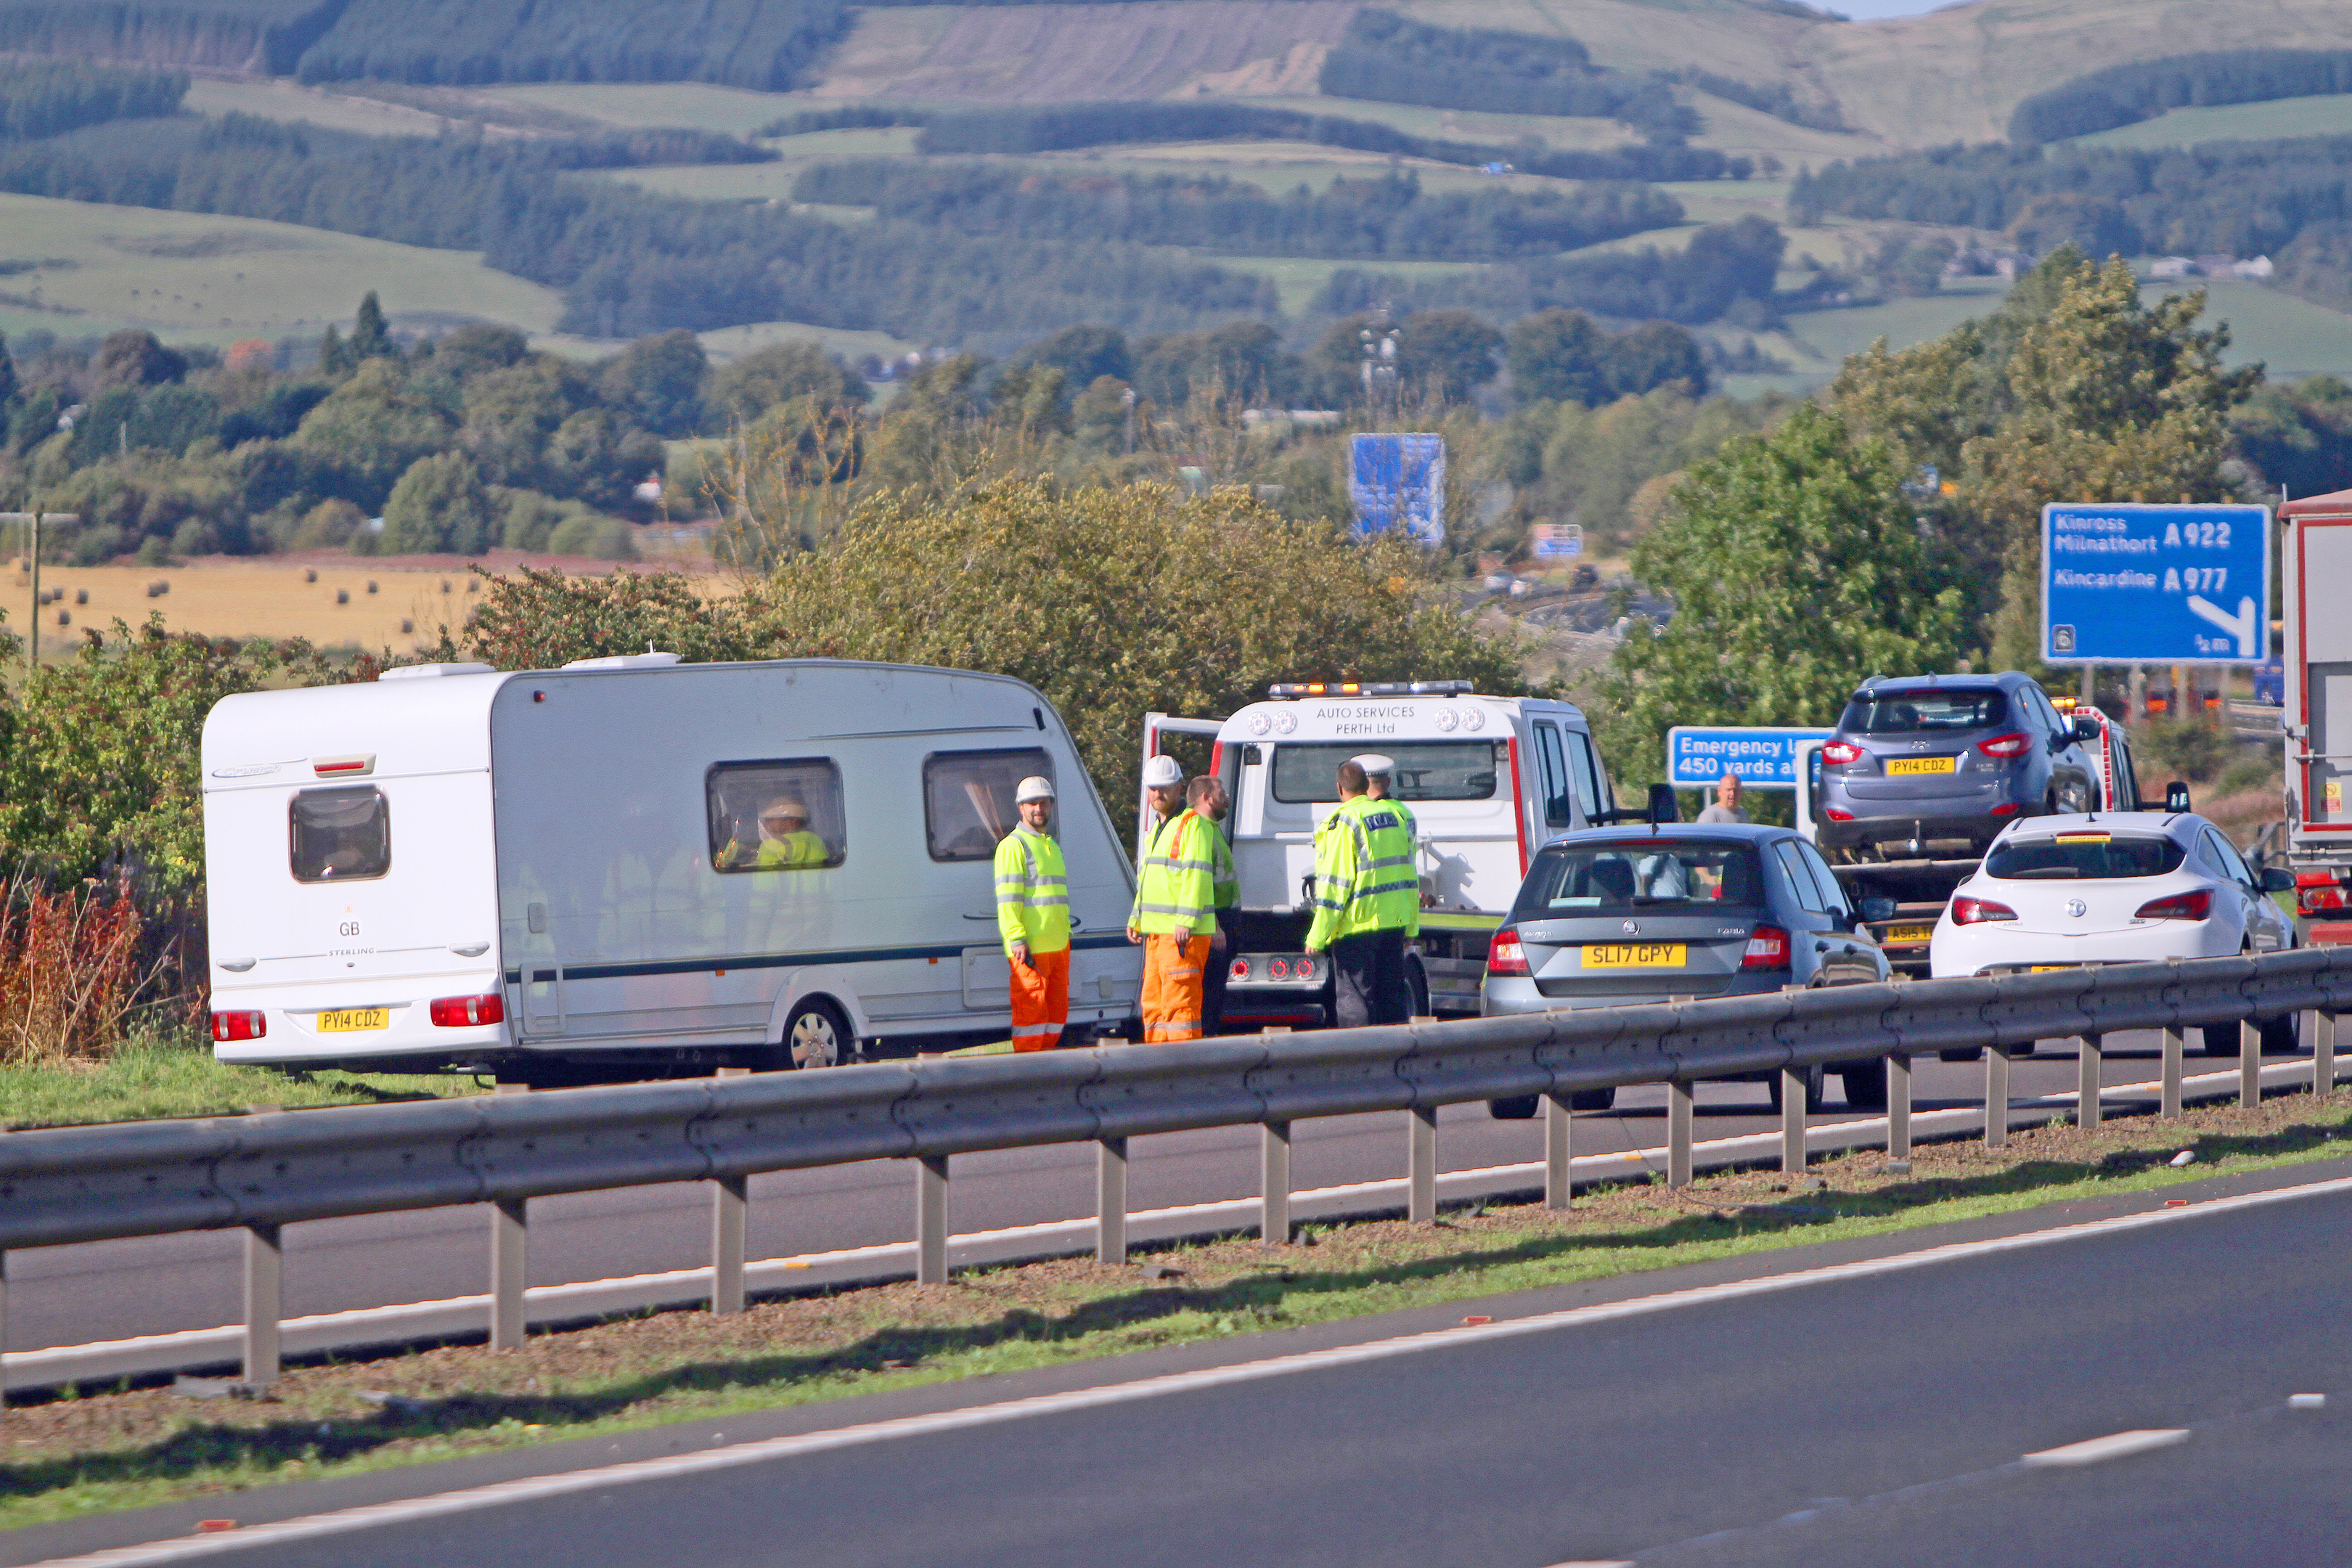 The scene of the M90 incident.